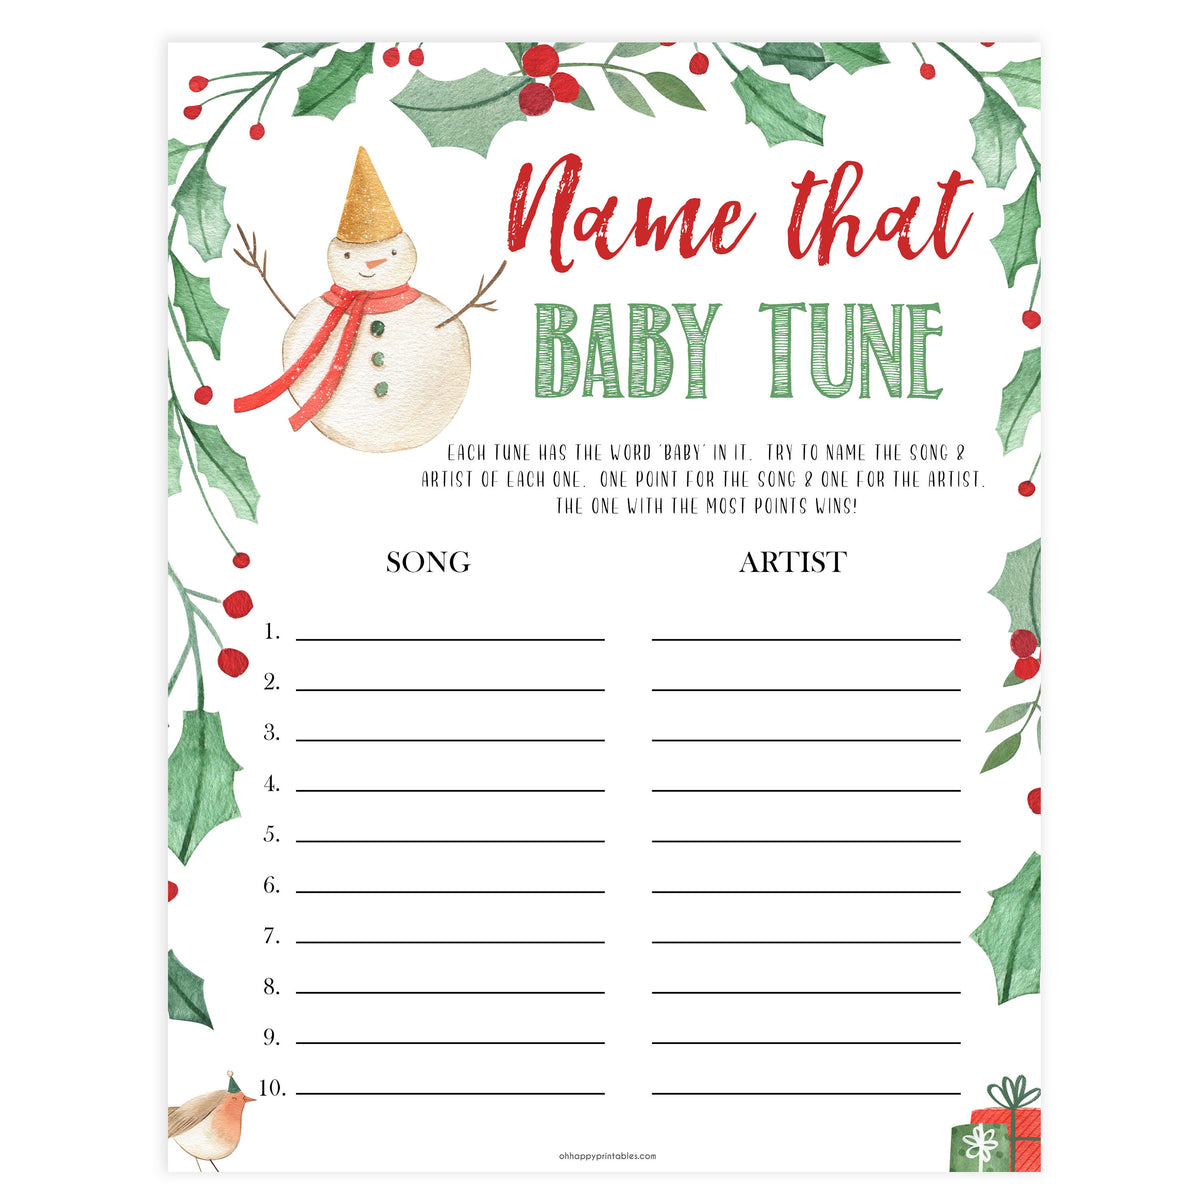 Christmas baby shower games, name that baby tune, festive baby shower games, best baby shower games, top 10 baby games, baby shower ideas, baby shower games